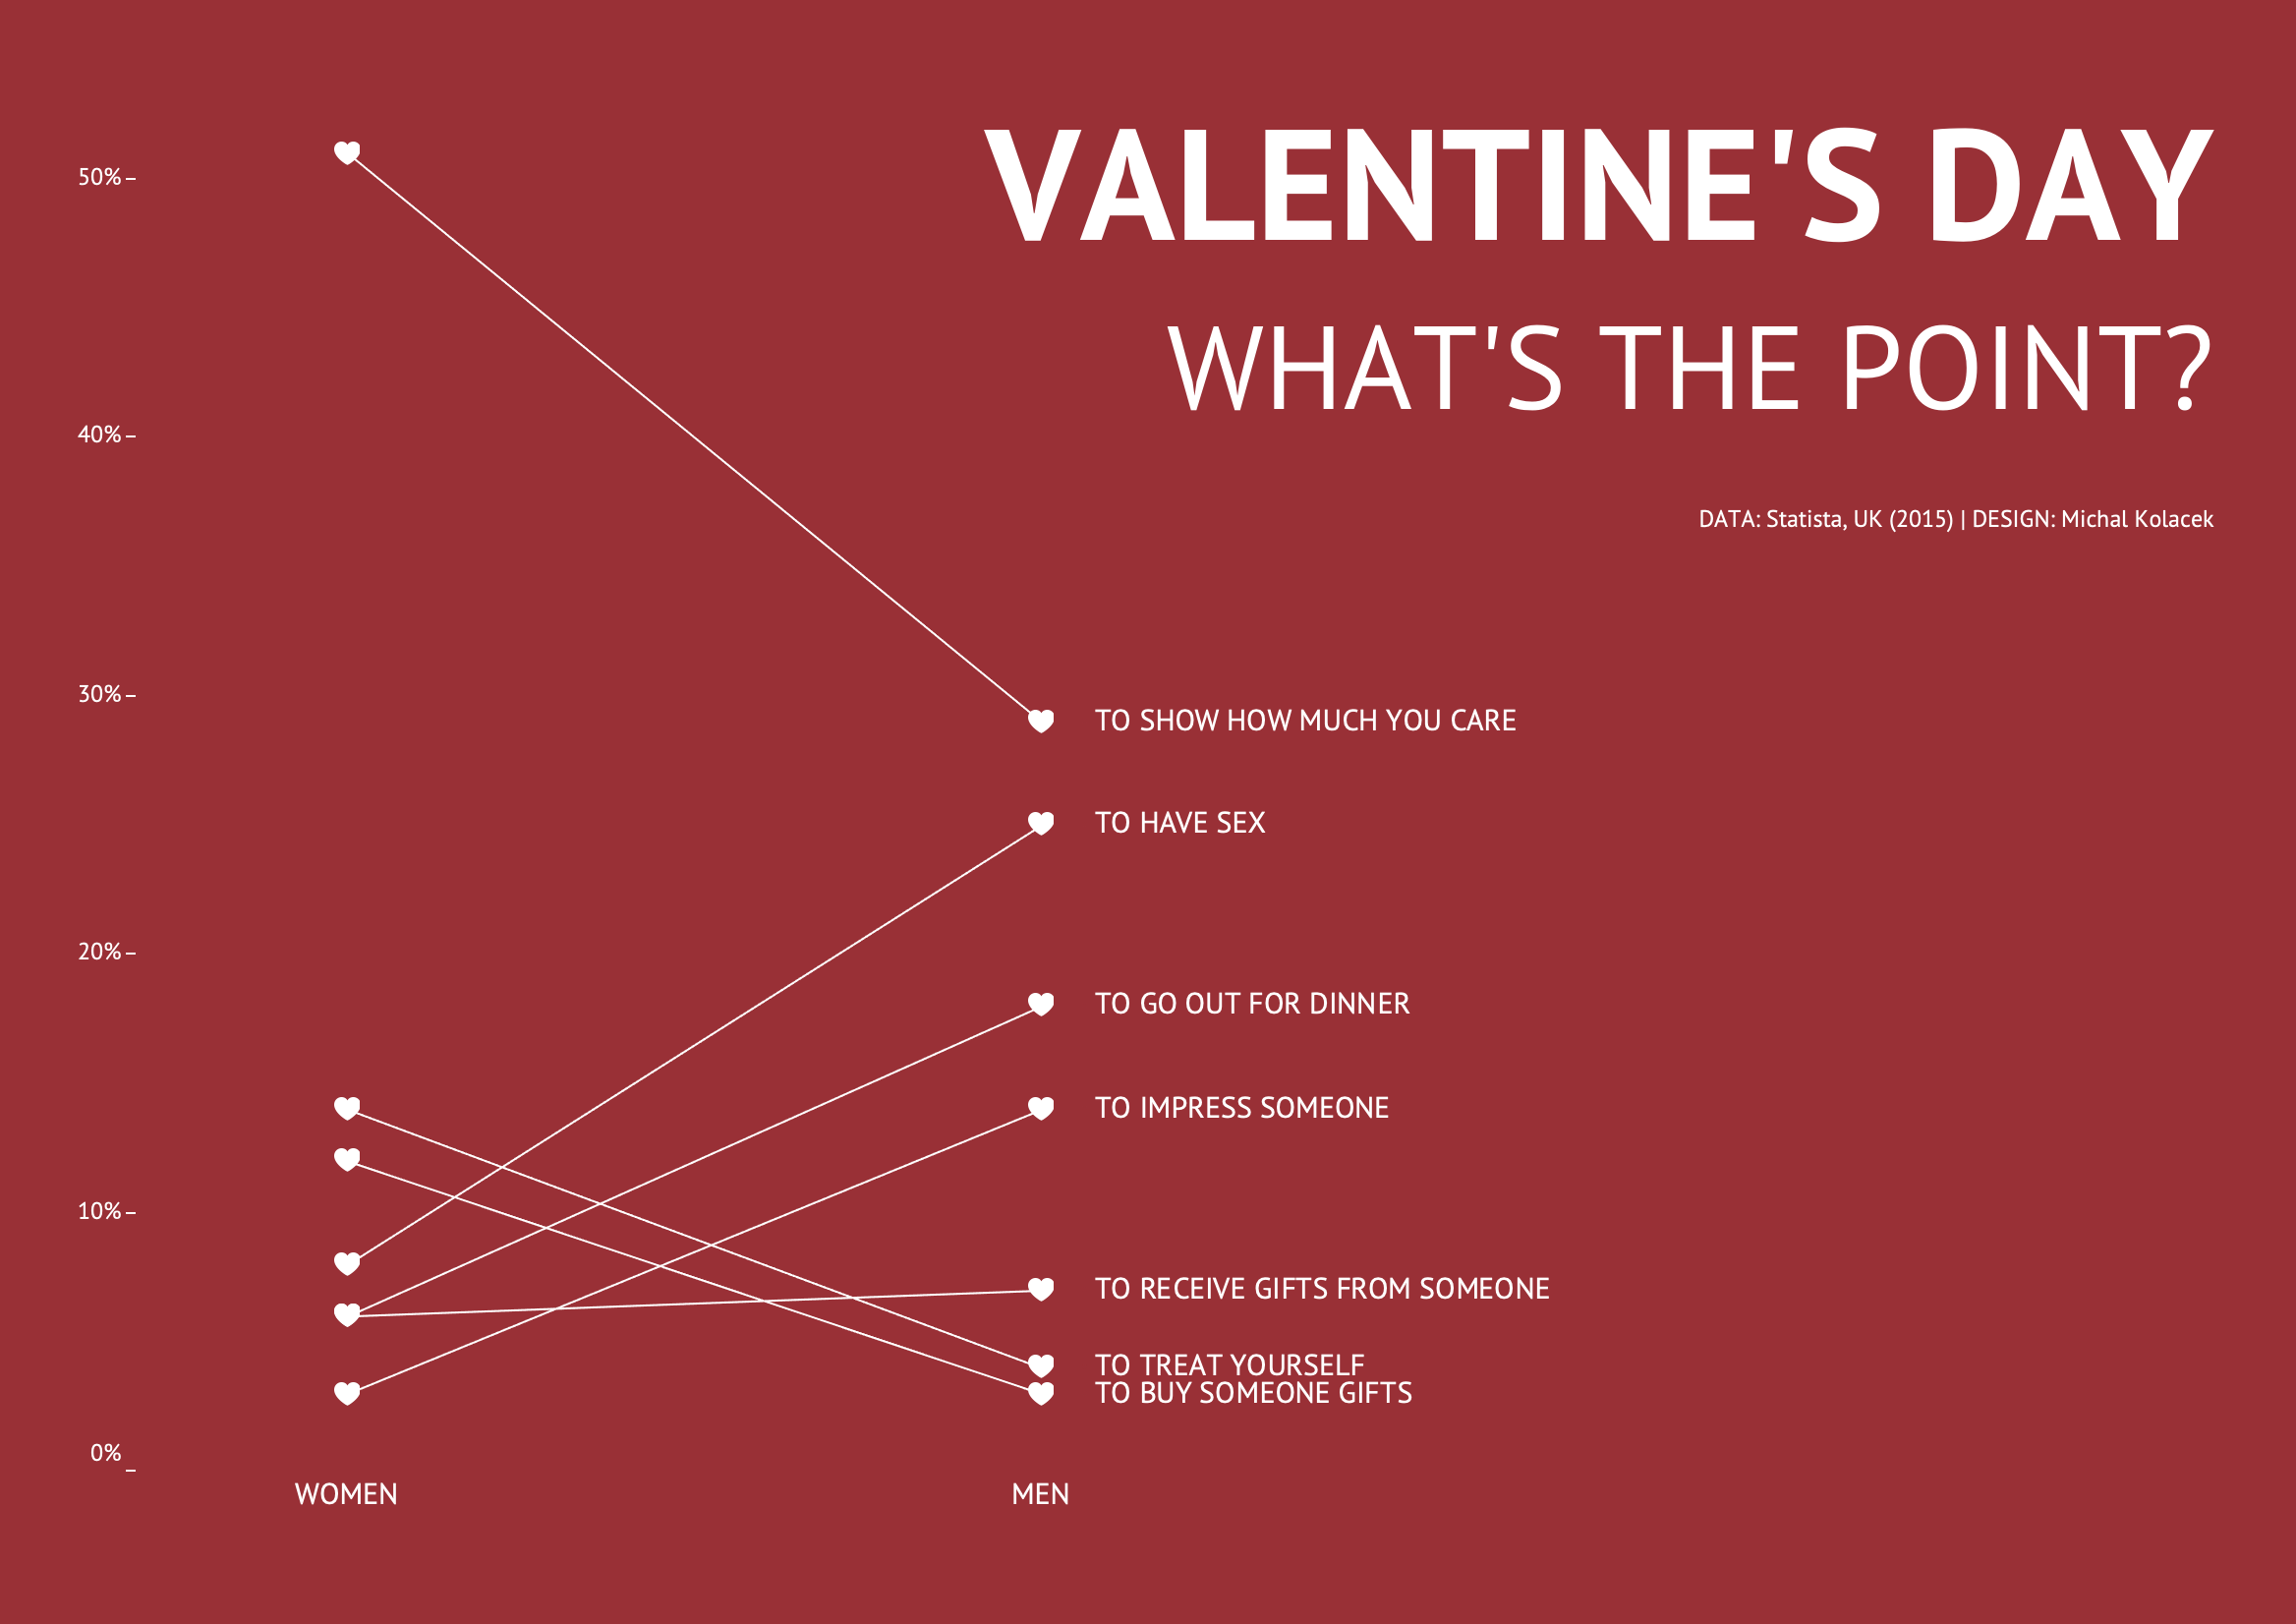 What's the point of Valentine's Day?